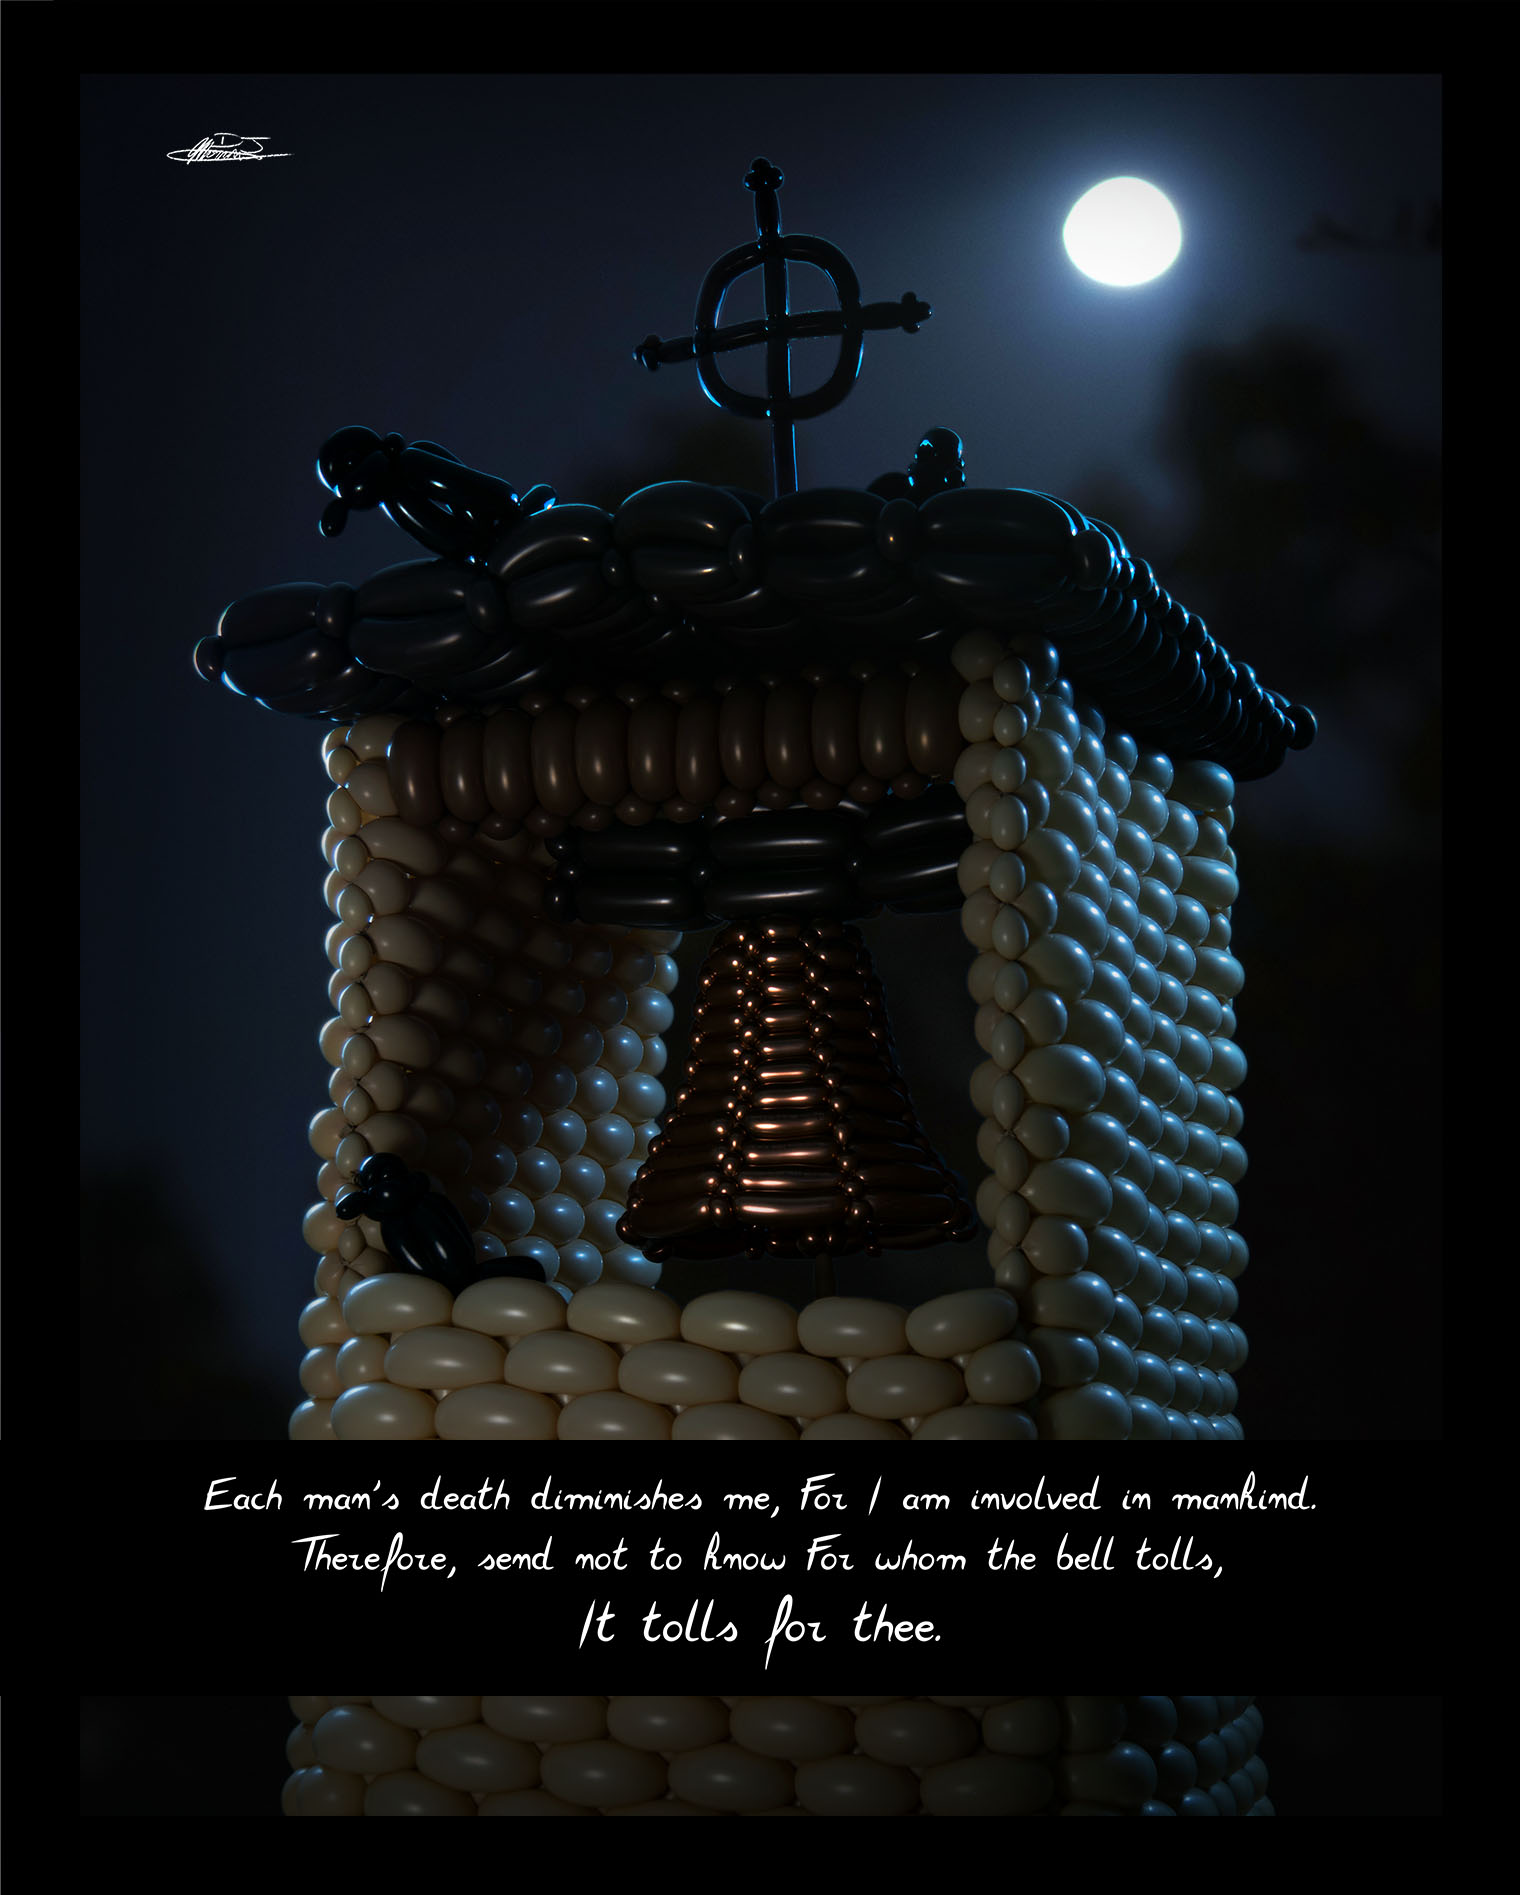 For whom the Bell tolls balloon sculpture of bell tower with excerpt from poem by John Donne